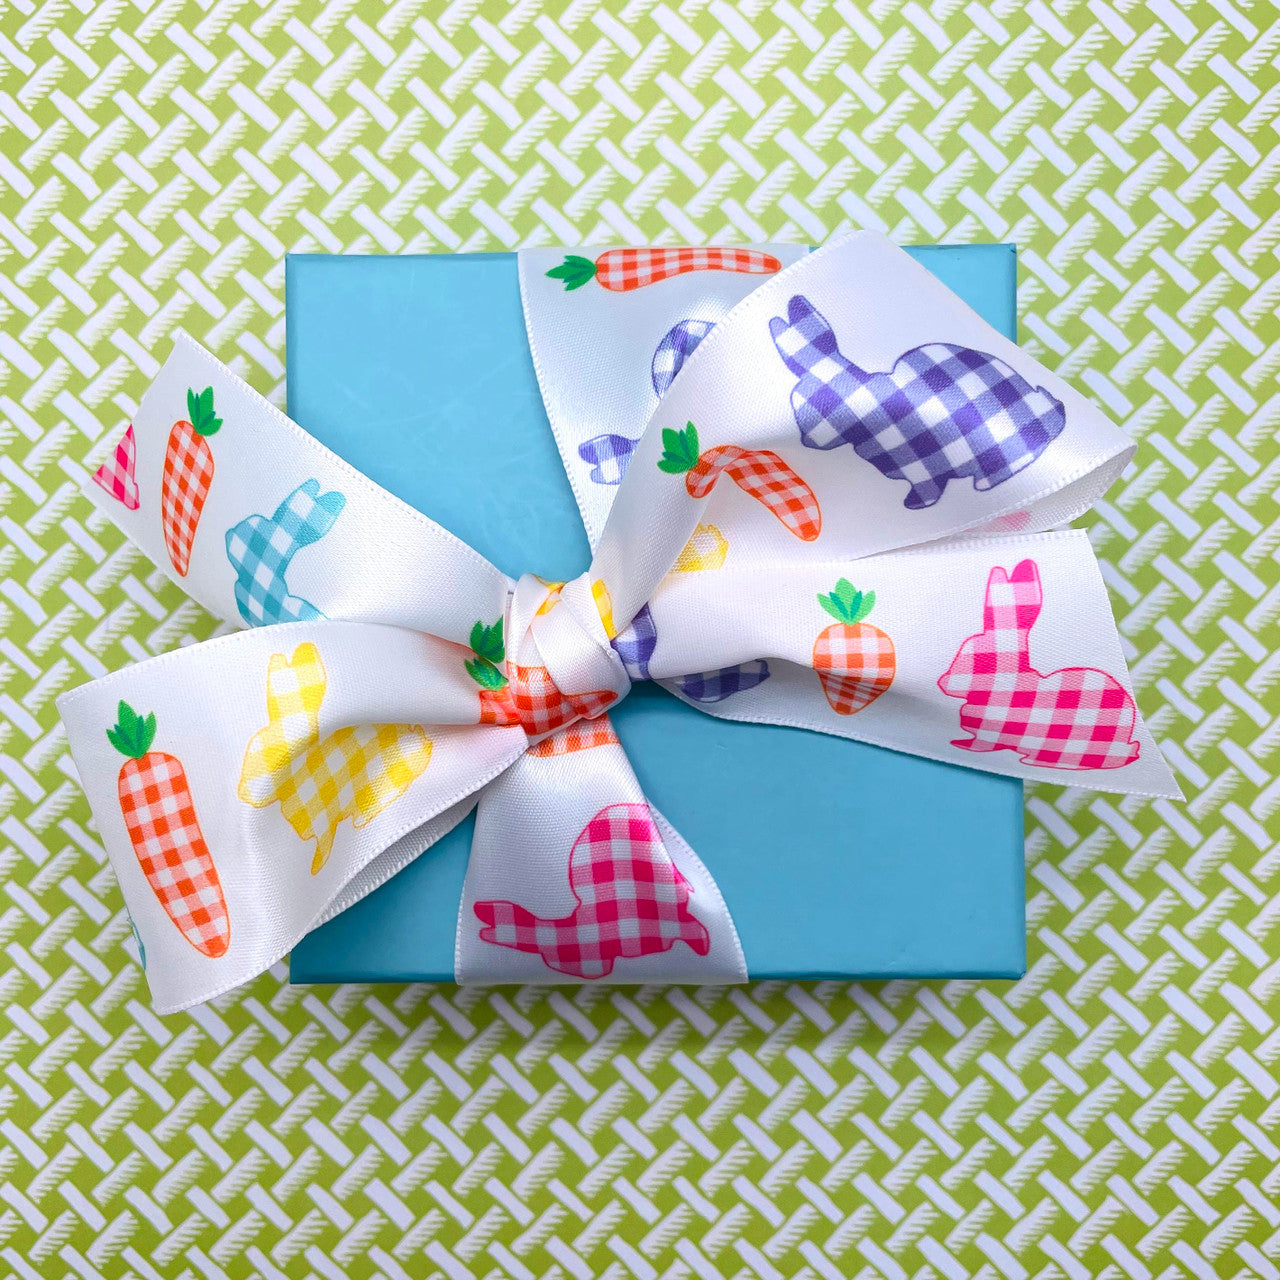 Tie a beautiful bow with these adorable gingham bunnies and carrots for the cutest Easter gift ever!